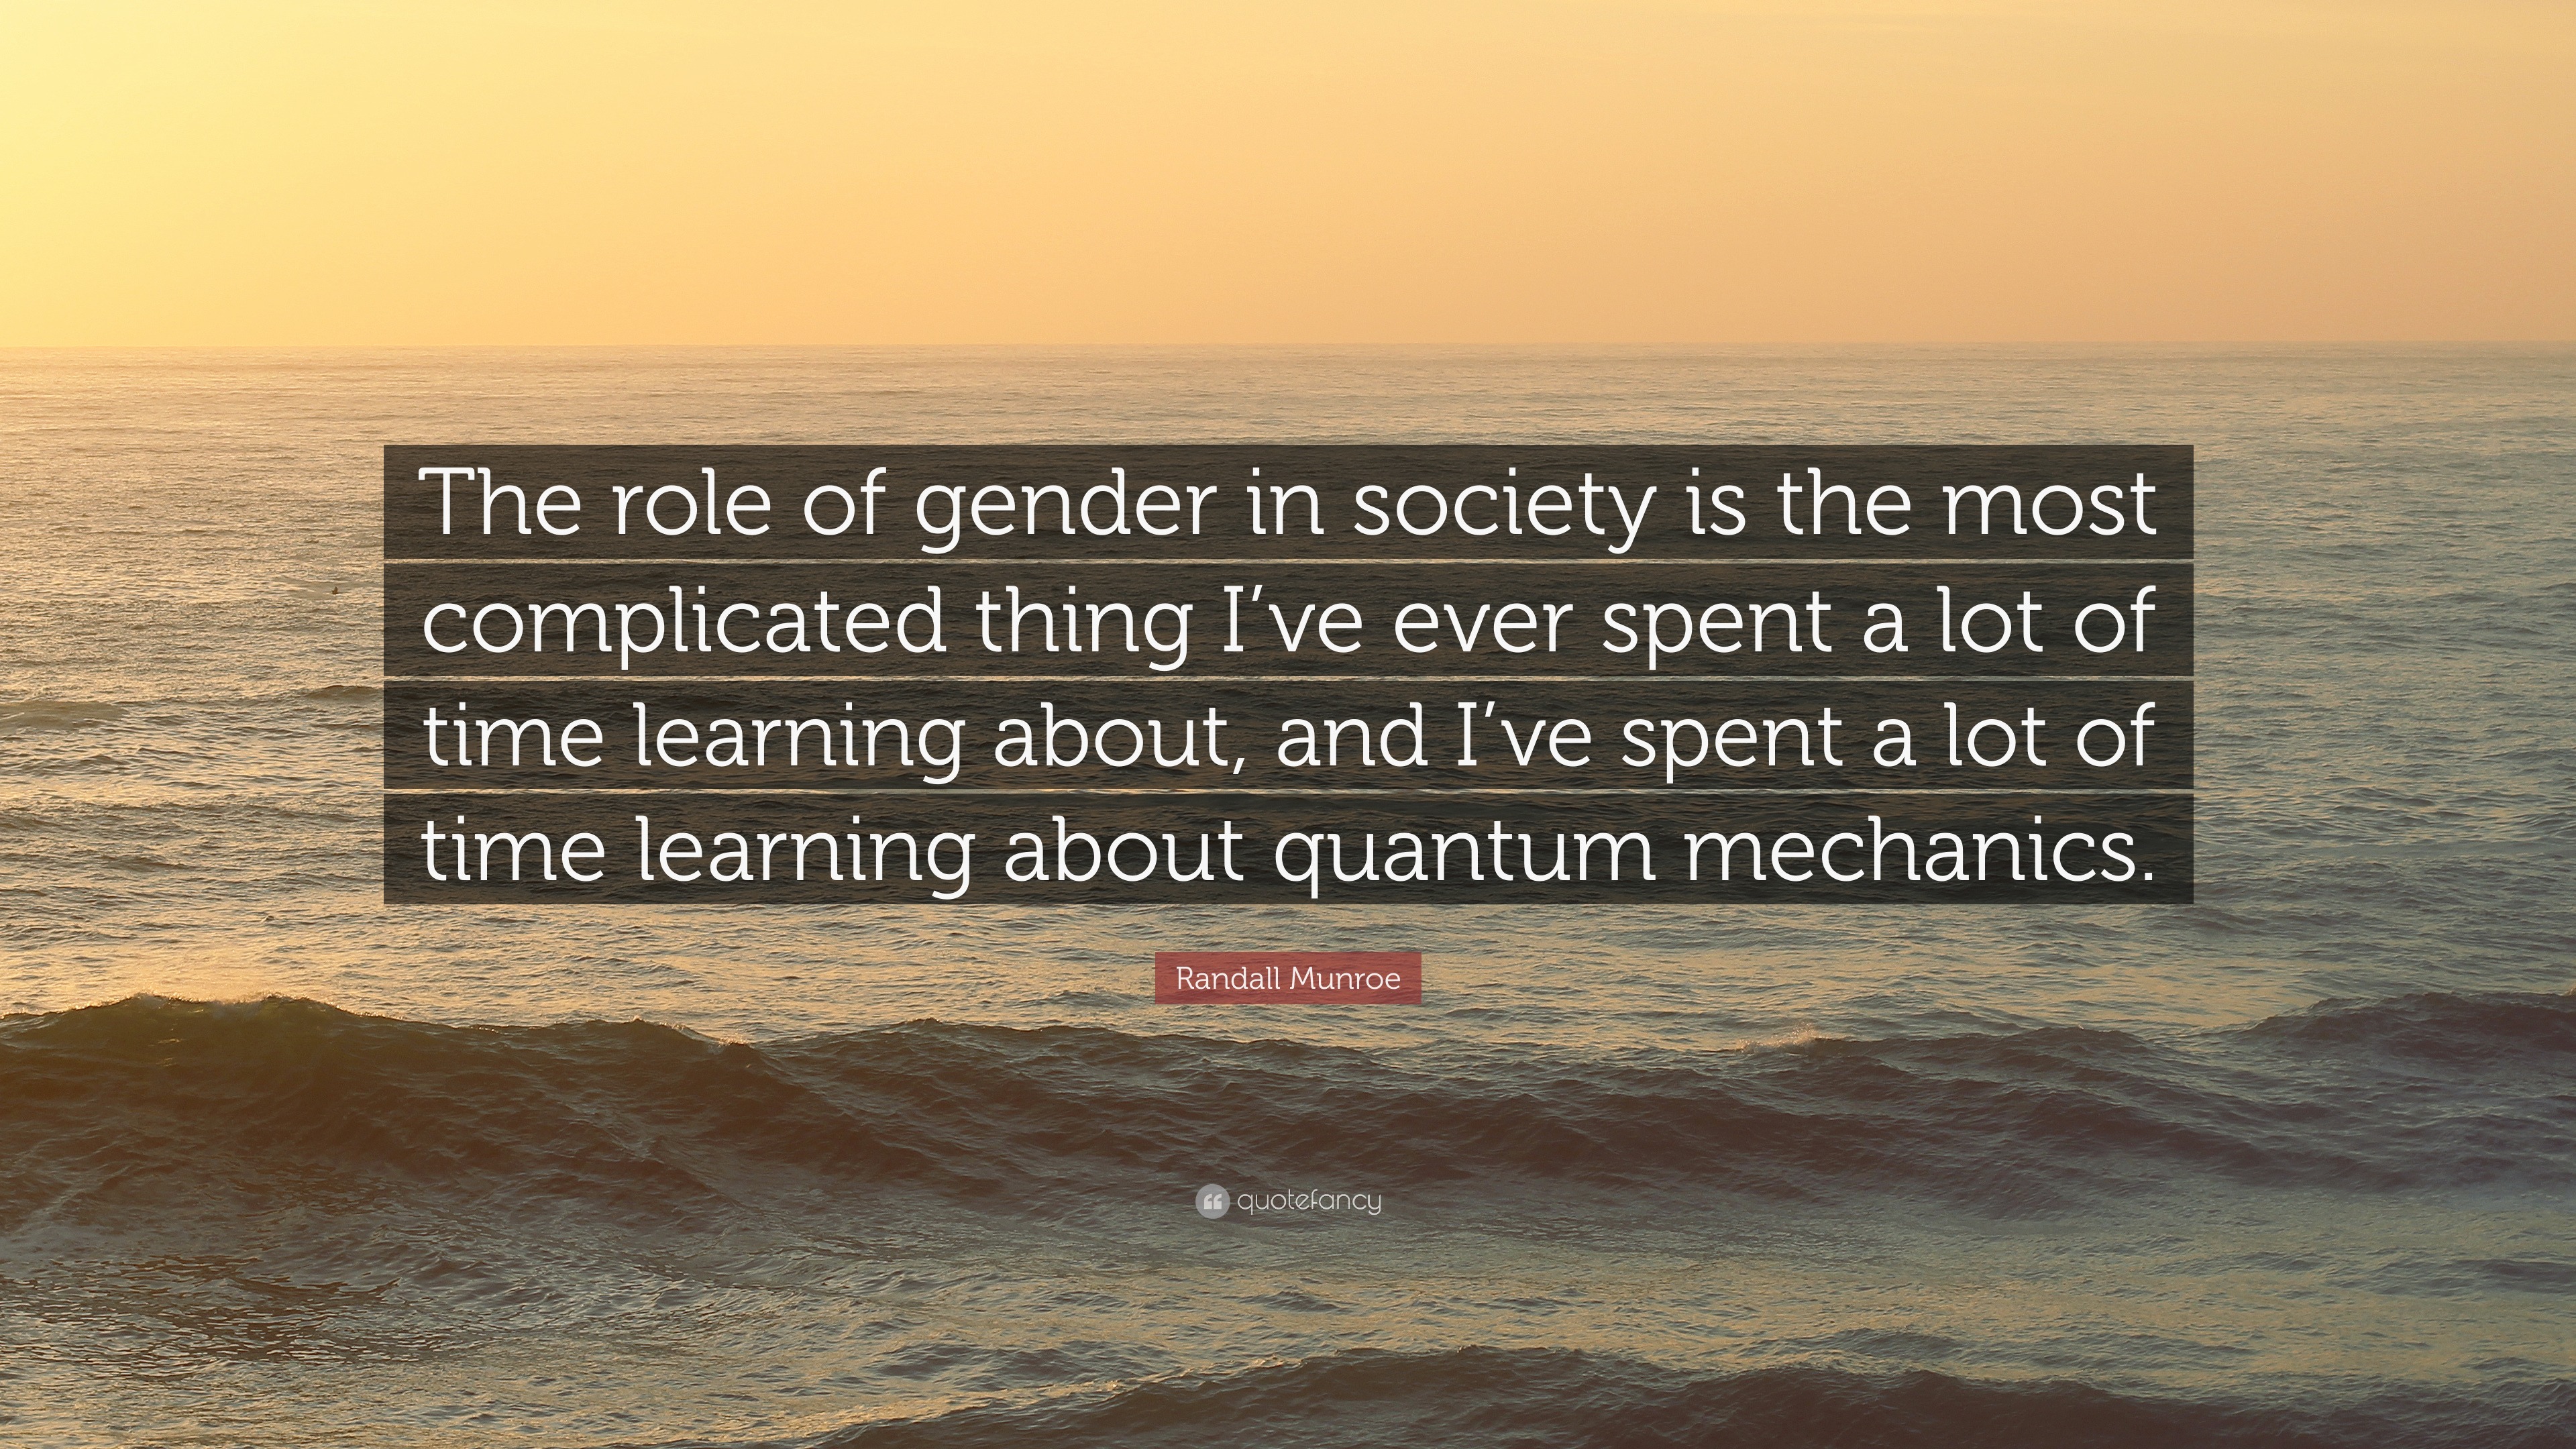 Randall Munroe Quote: “The role of gender in society is the most